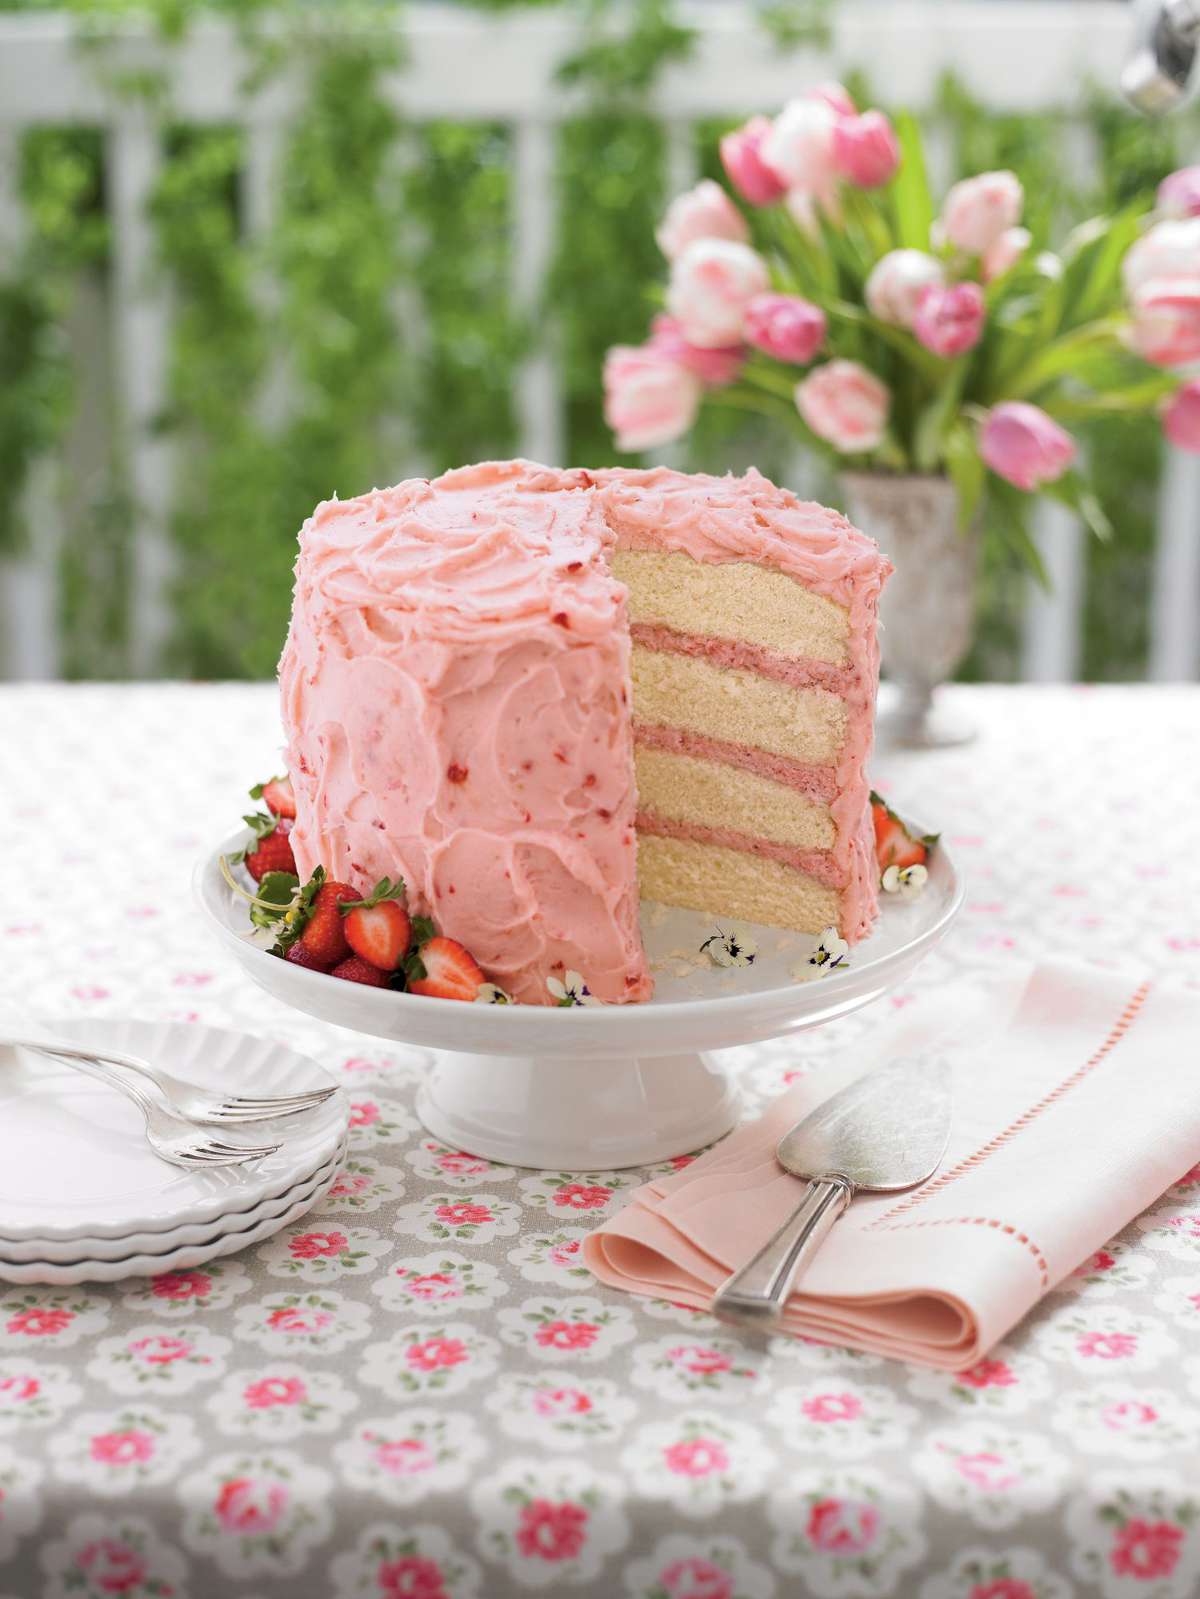 Download 10 Cakes To Serve At Your Grandmother S Next Birthday Party Southern Living